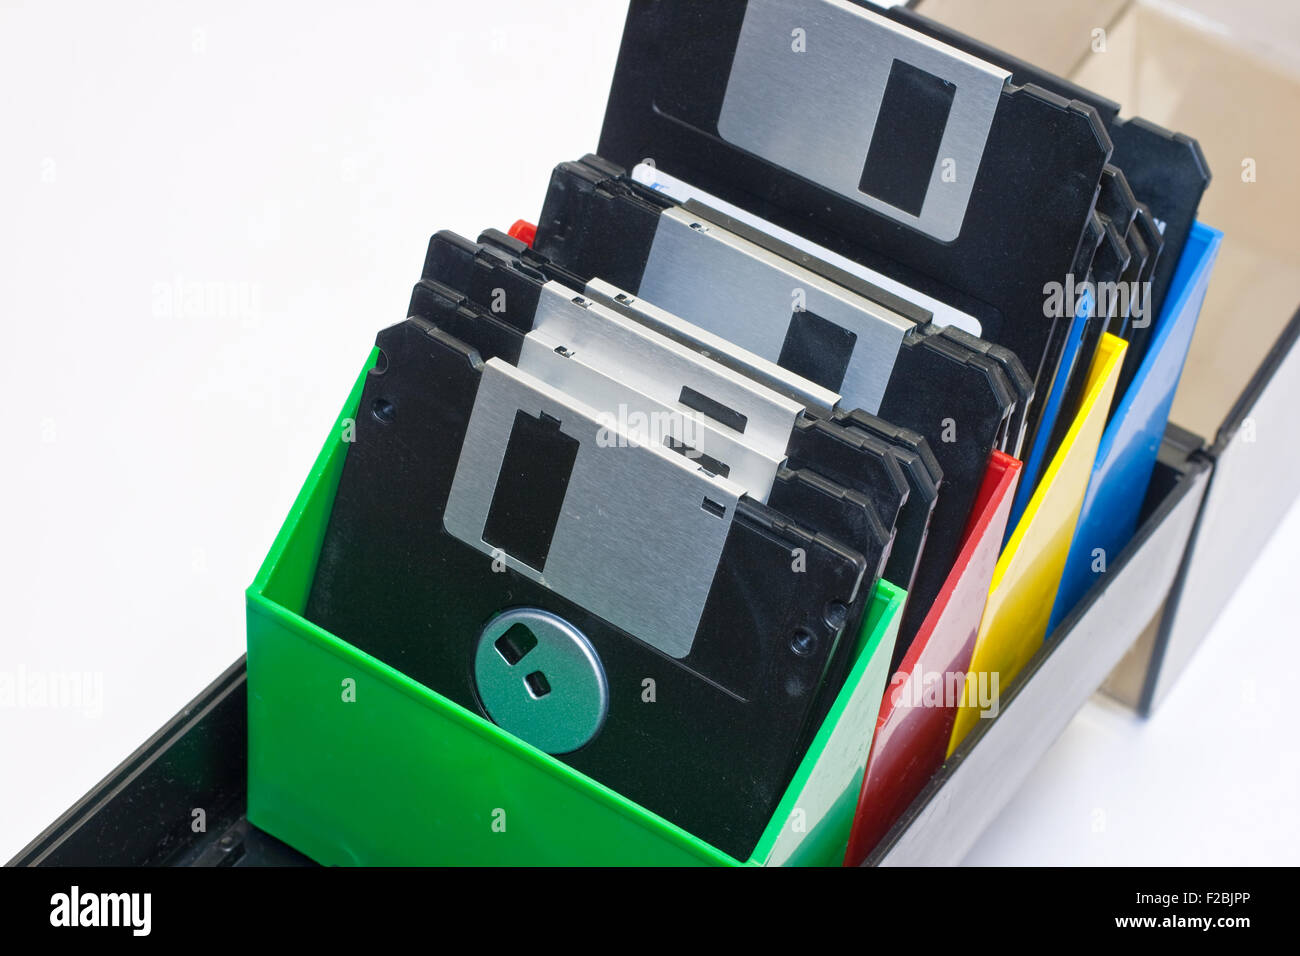 Floppy disk in a box container. White background Stock Photo